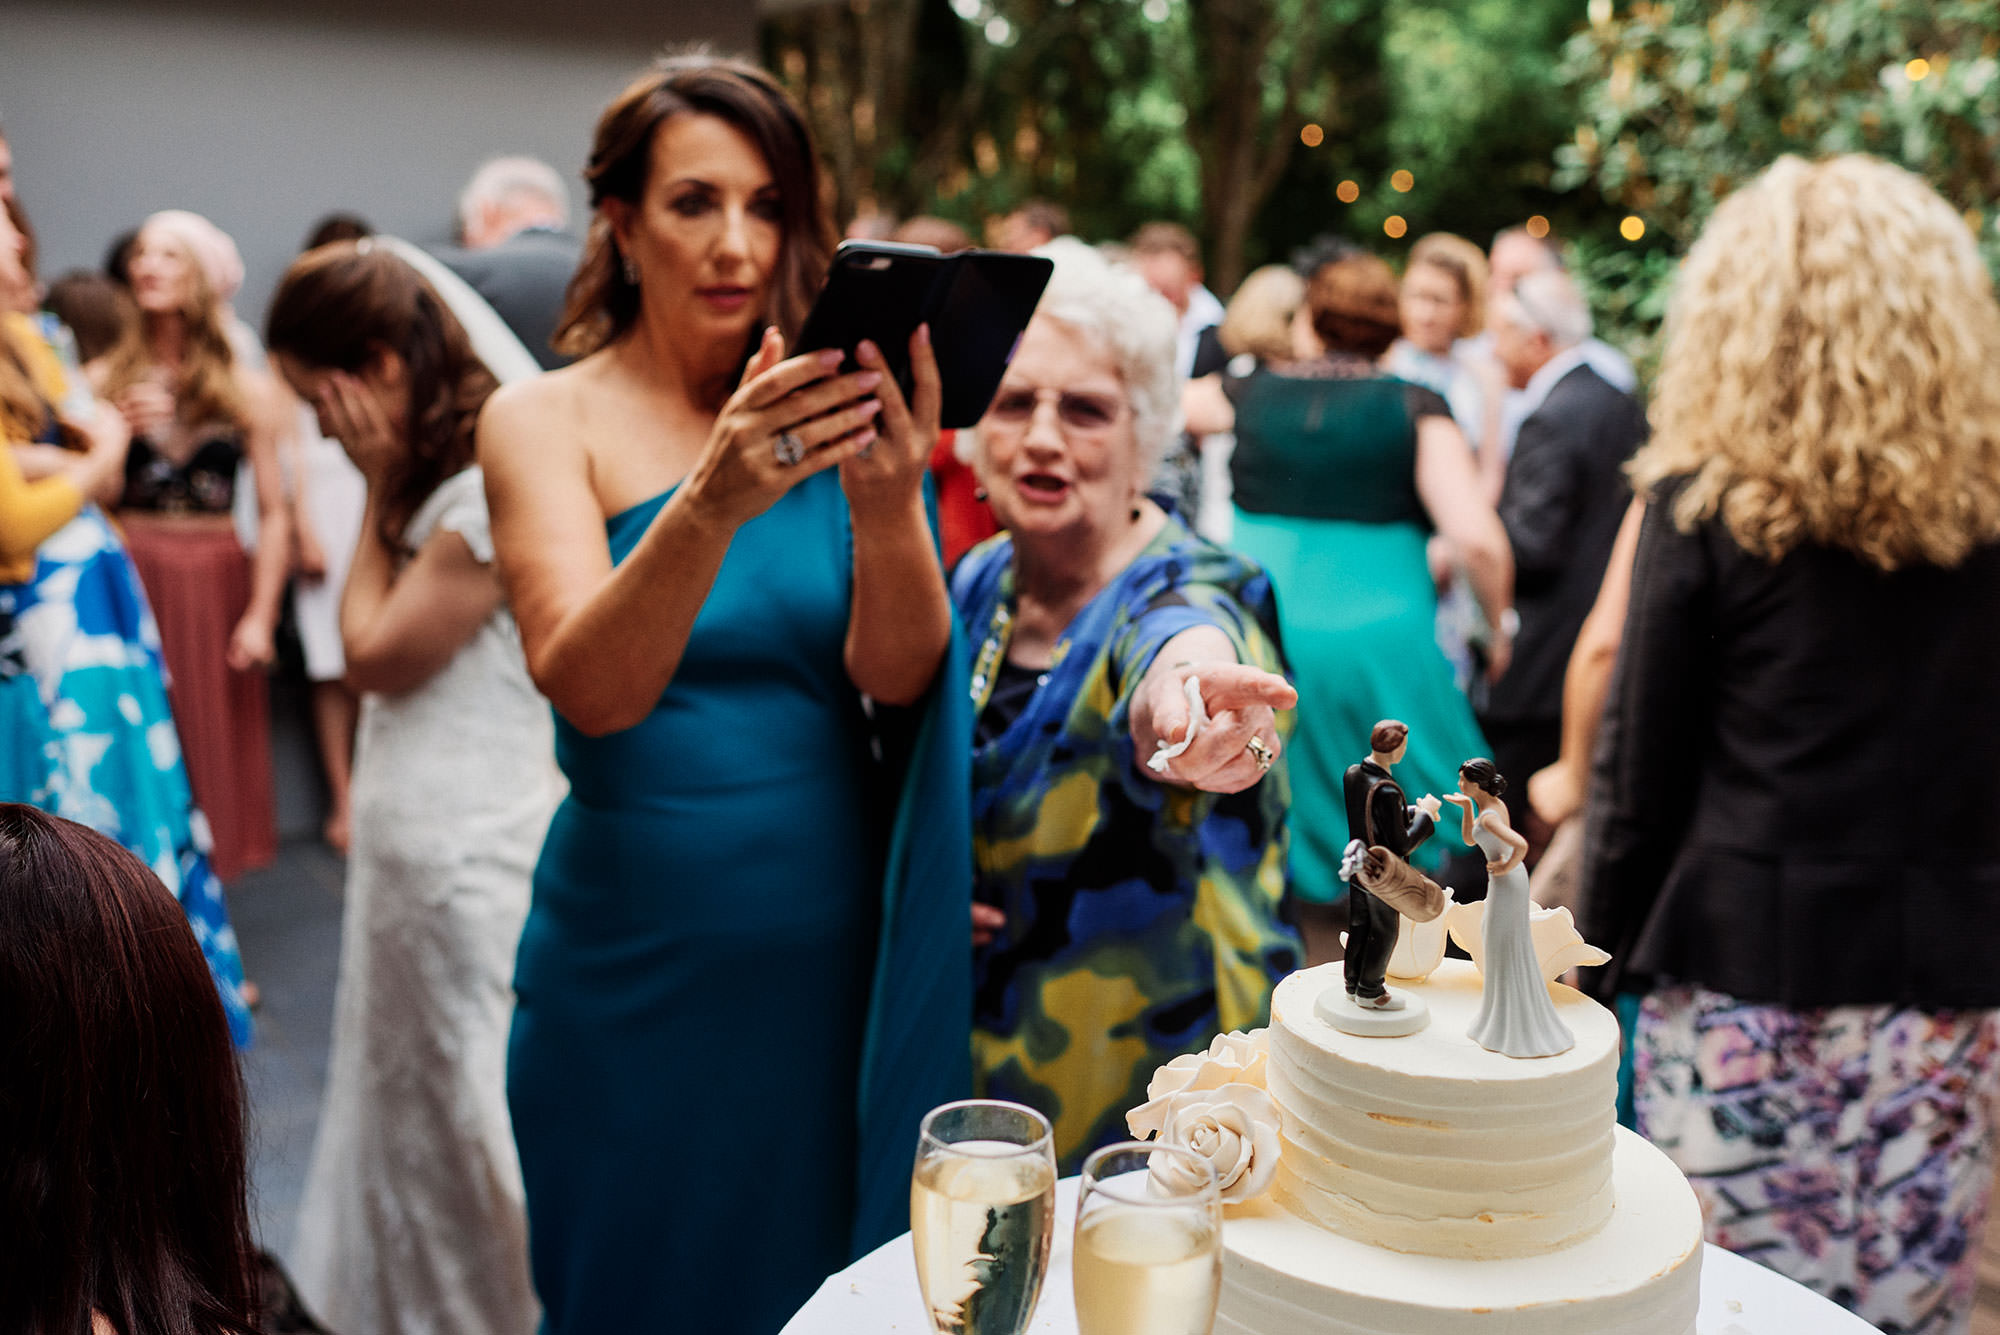 guests admiring the cake